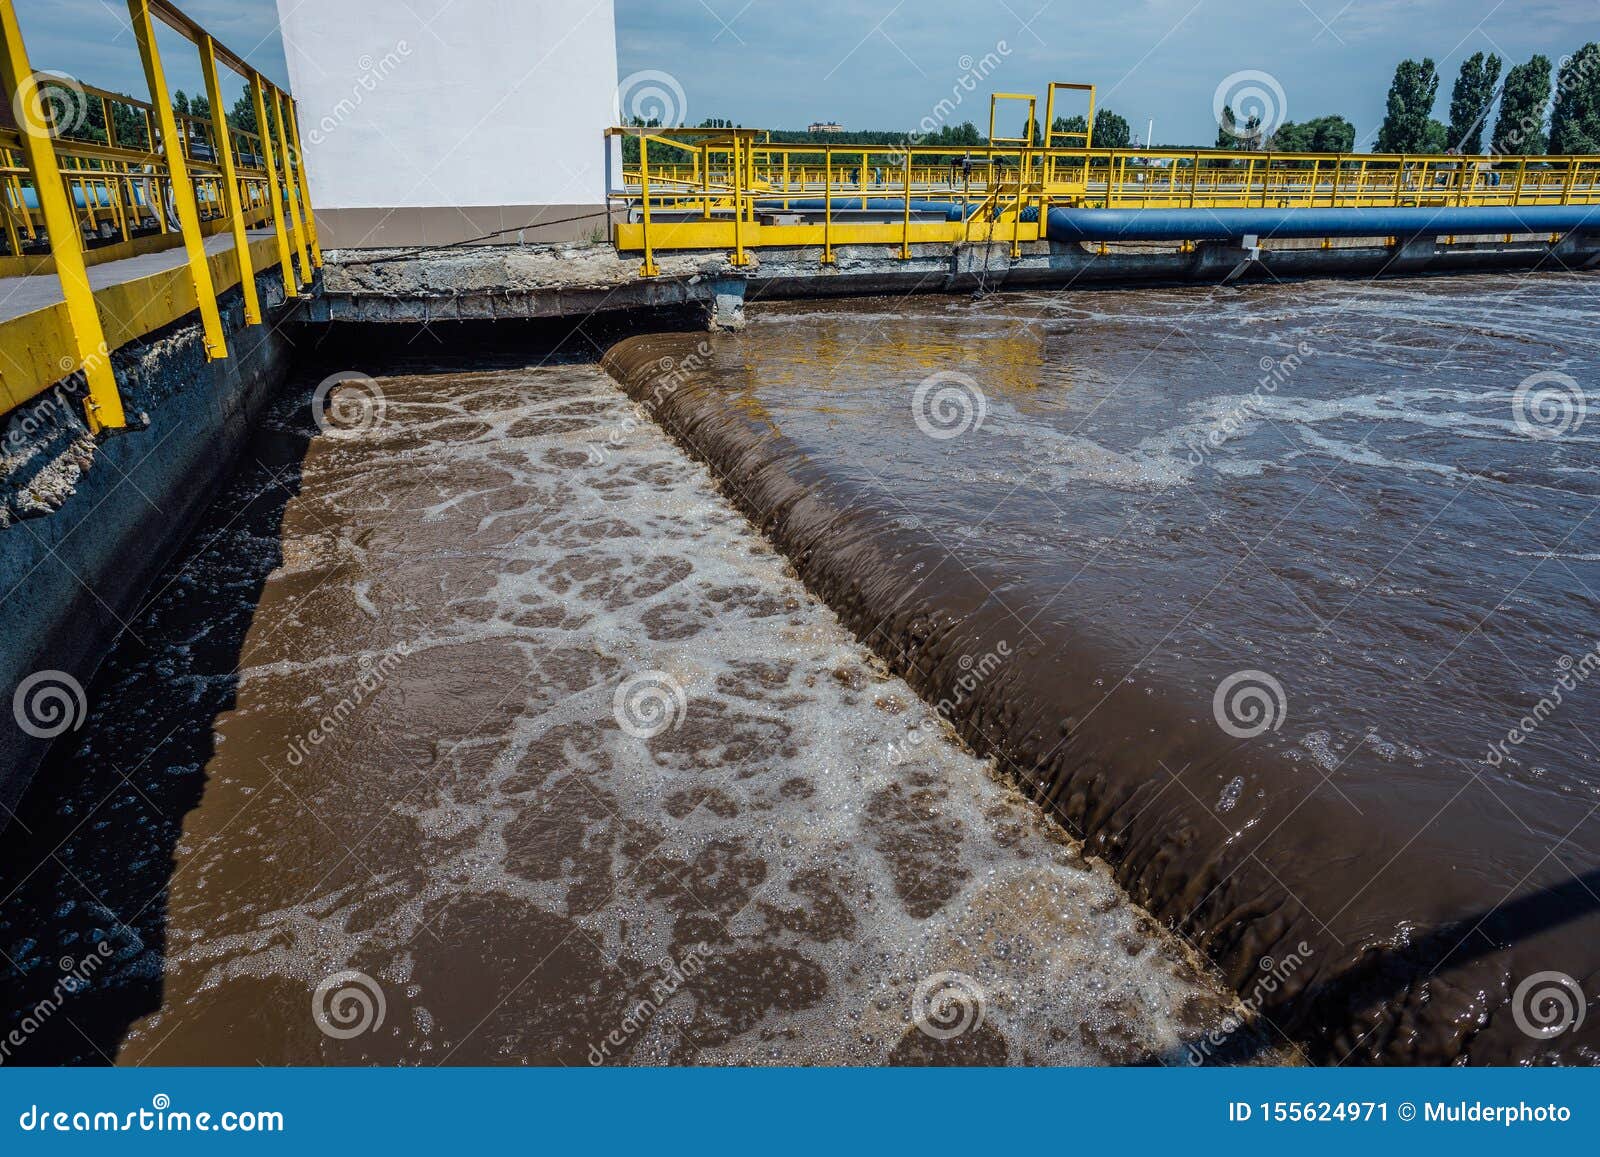 Modern Wastewater Treatment Plant. Tanks for Aeration and Biological ...